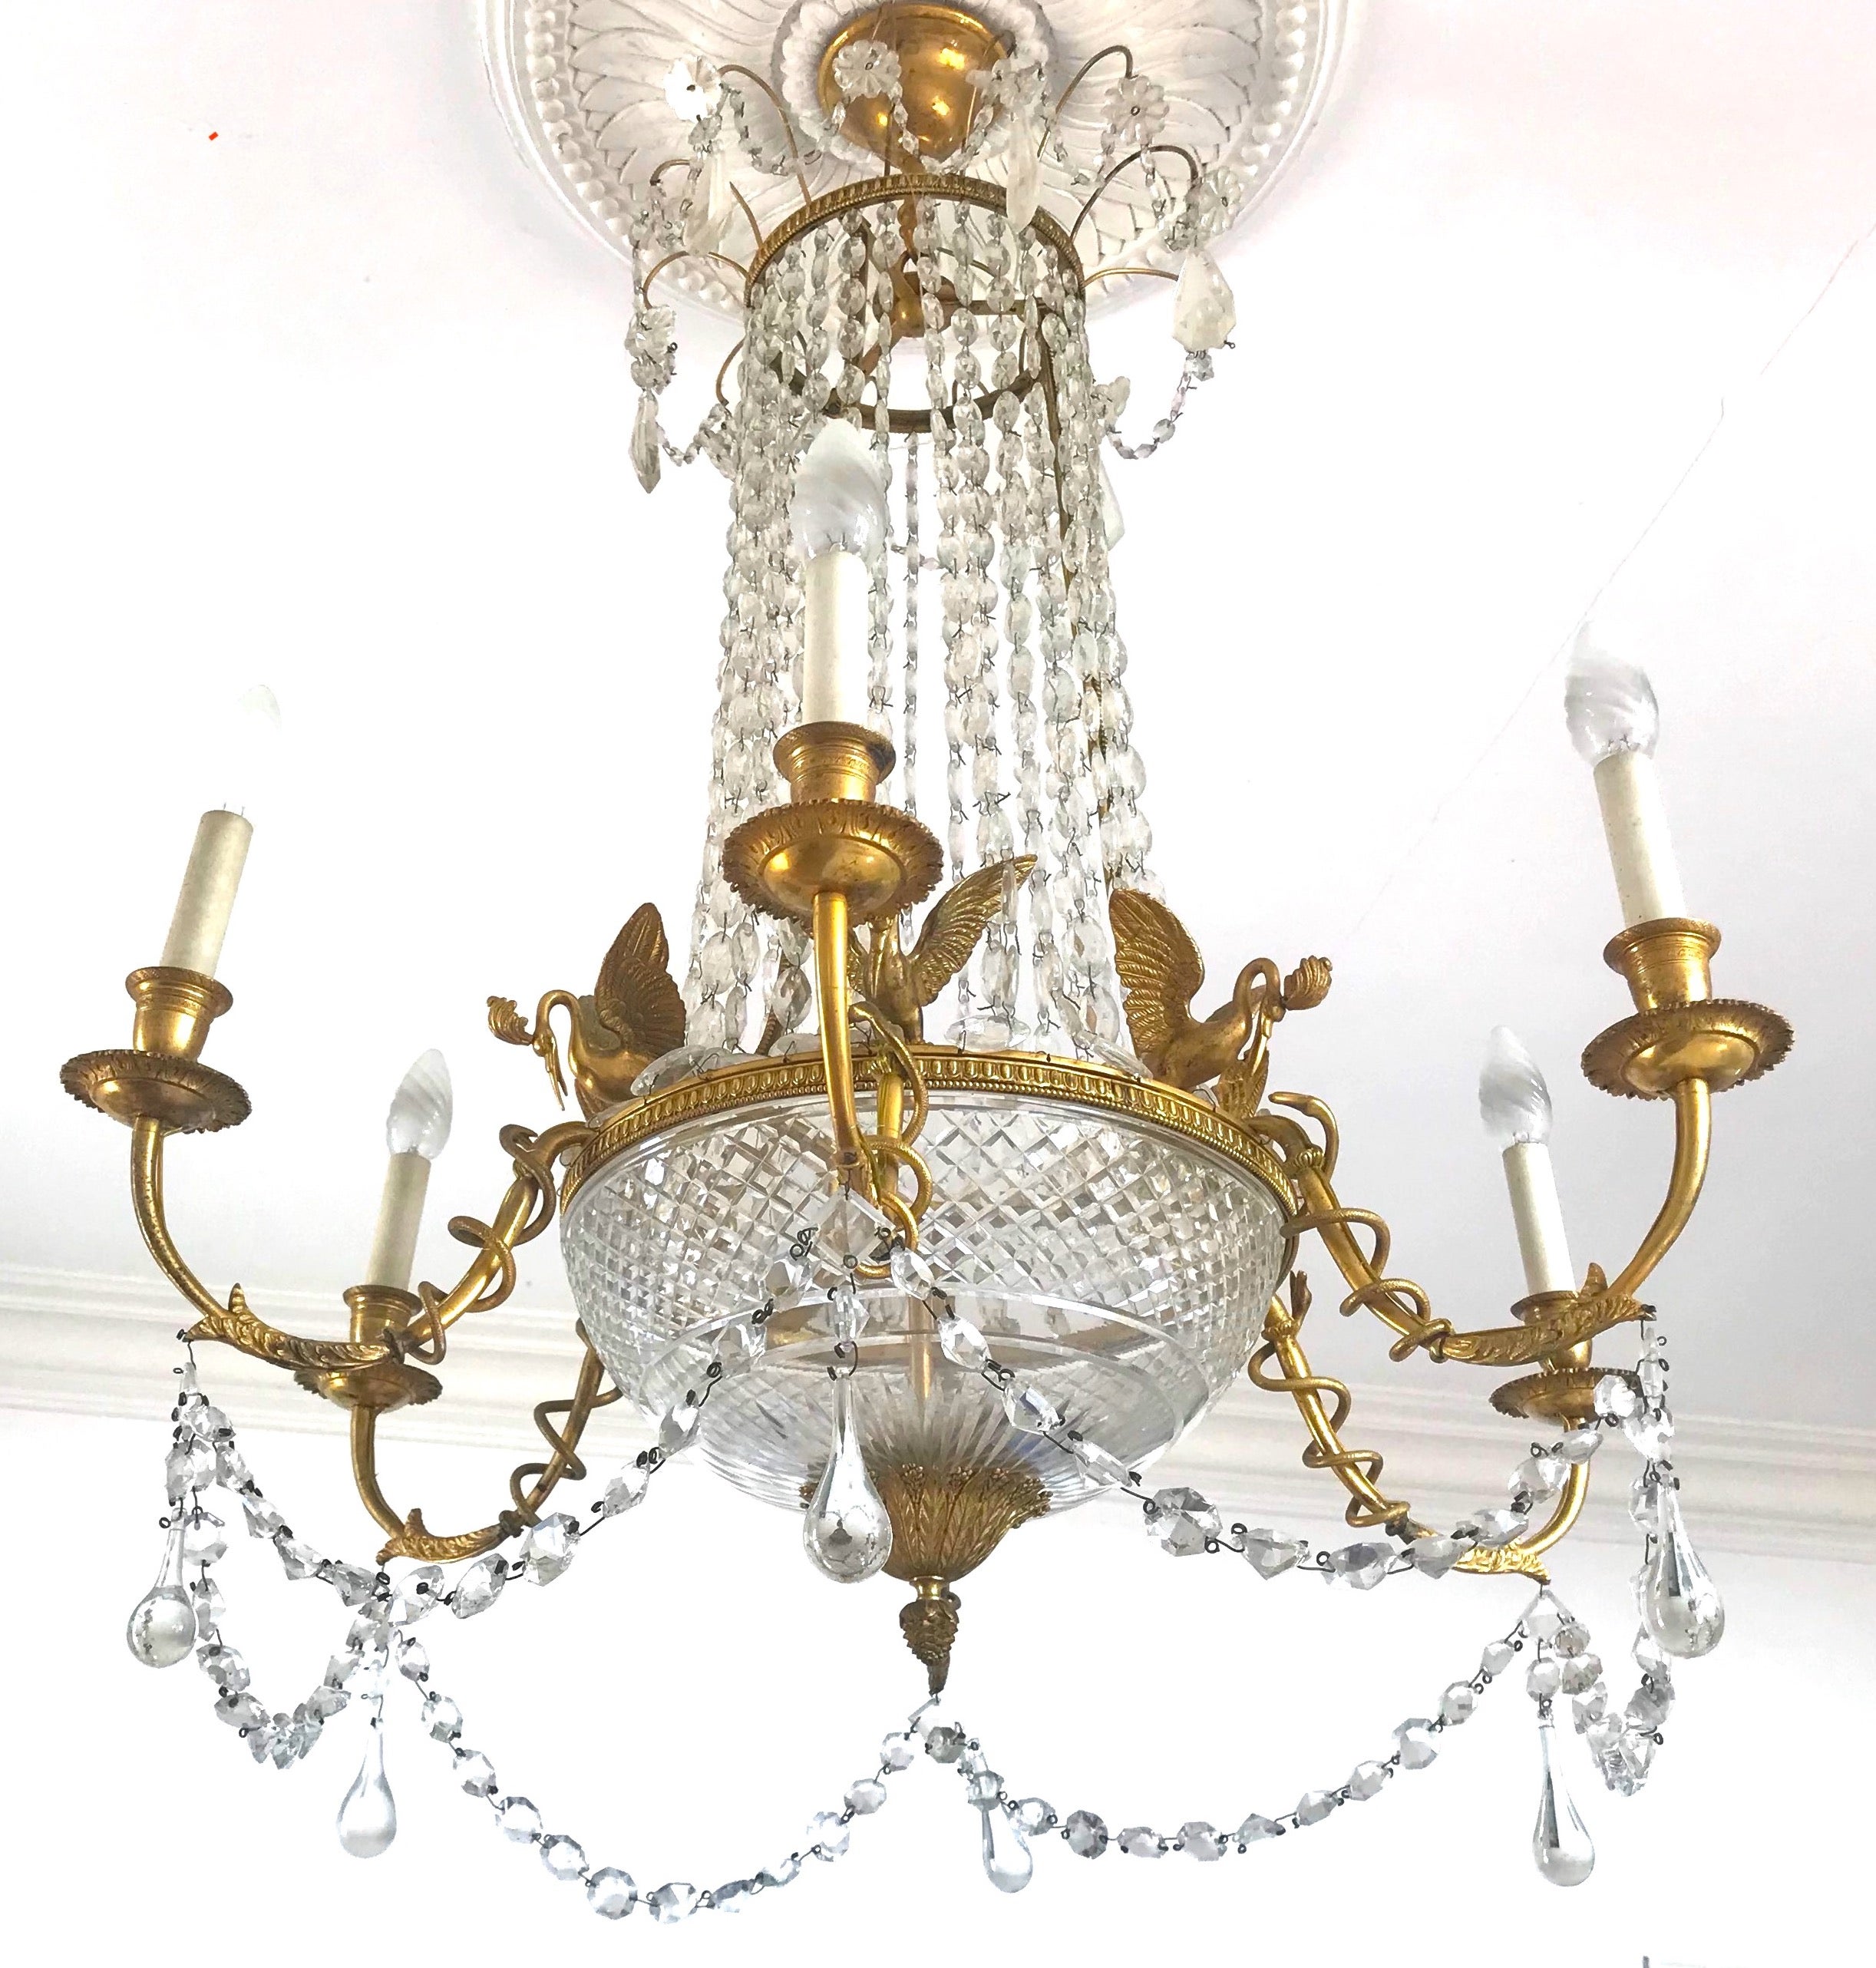 Finely chiseled gilt bronze and cut crystal Empire elegant chandelier with six arms.
Cleaned and re-wired, in full working order and ready to use.
 In excellent vintage condition.
Six E 14 light bulbs.
We can wire the fixture for your country